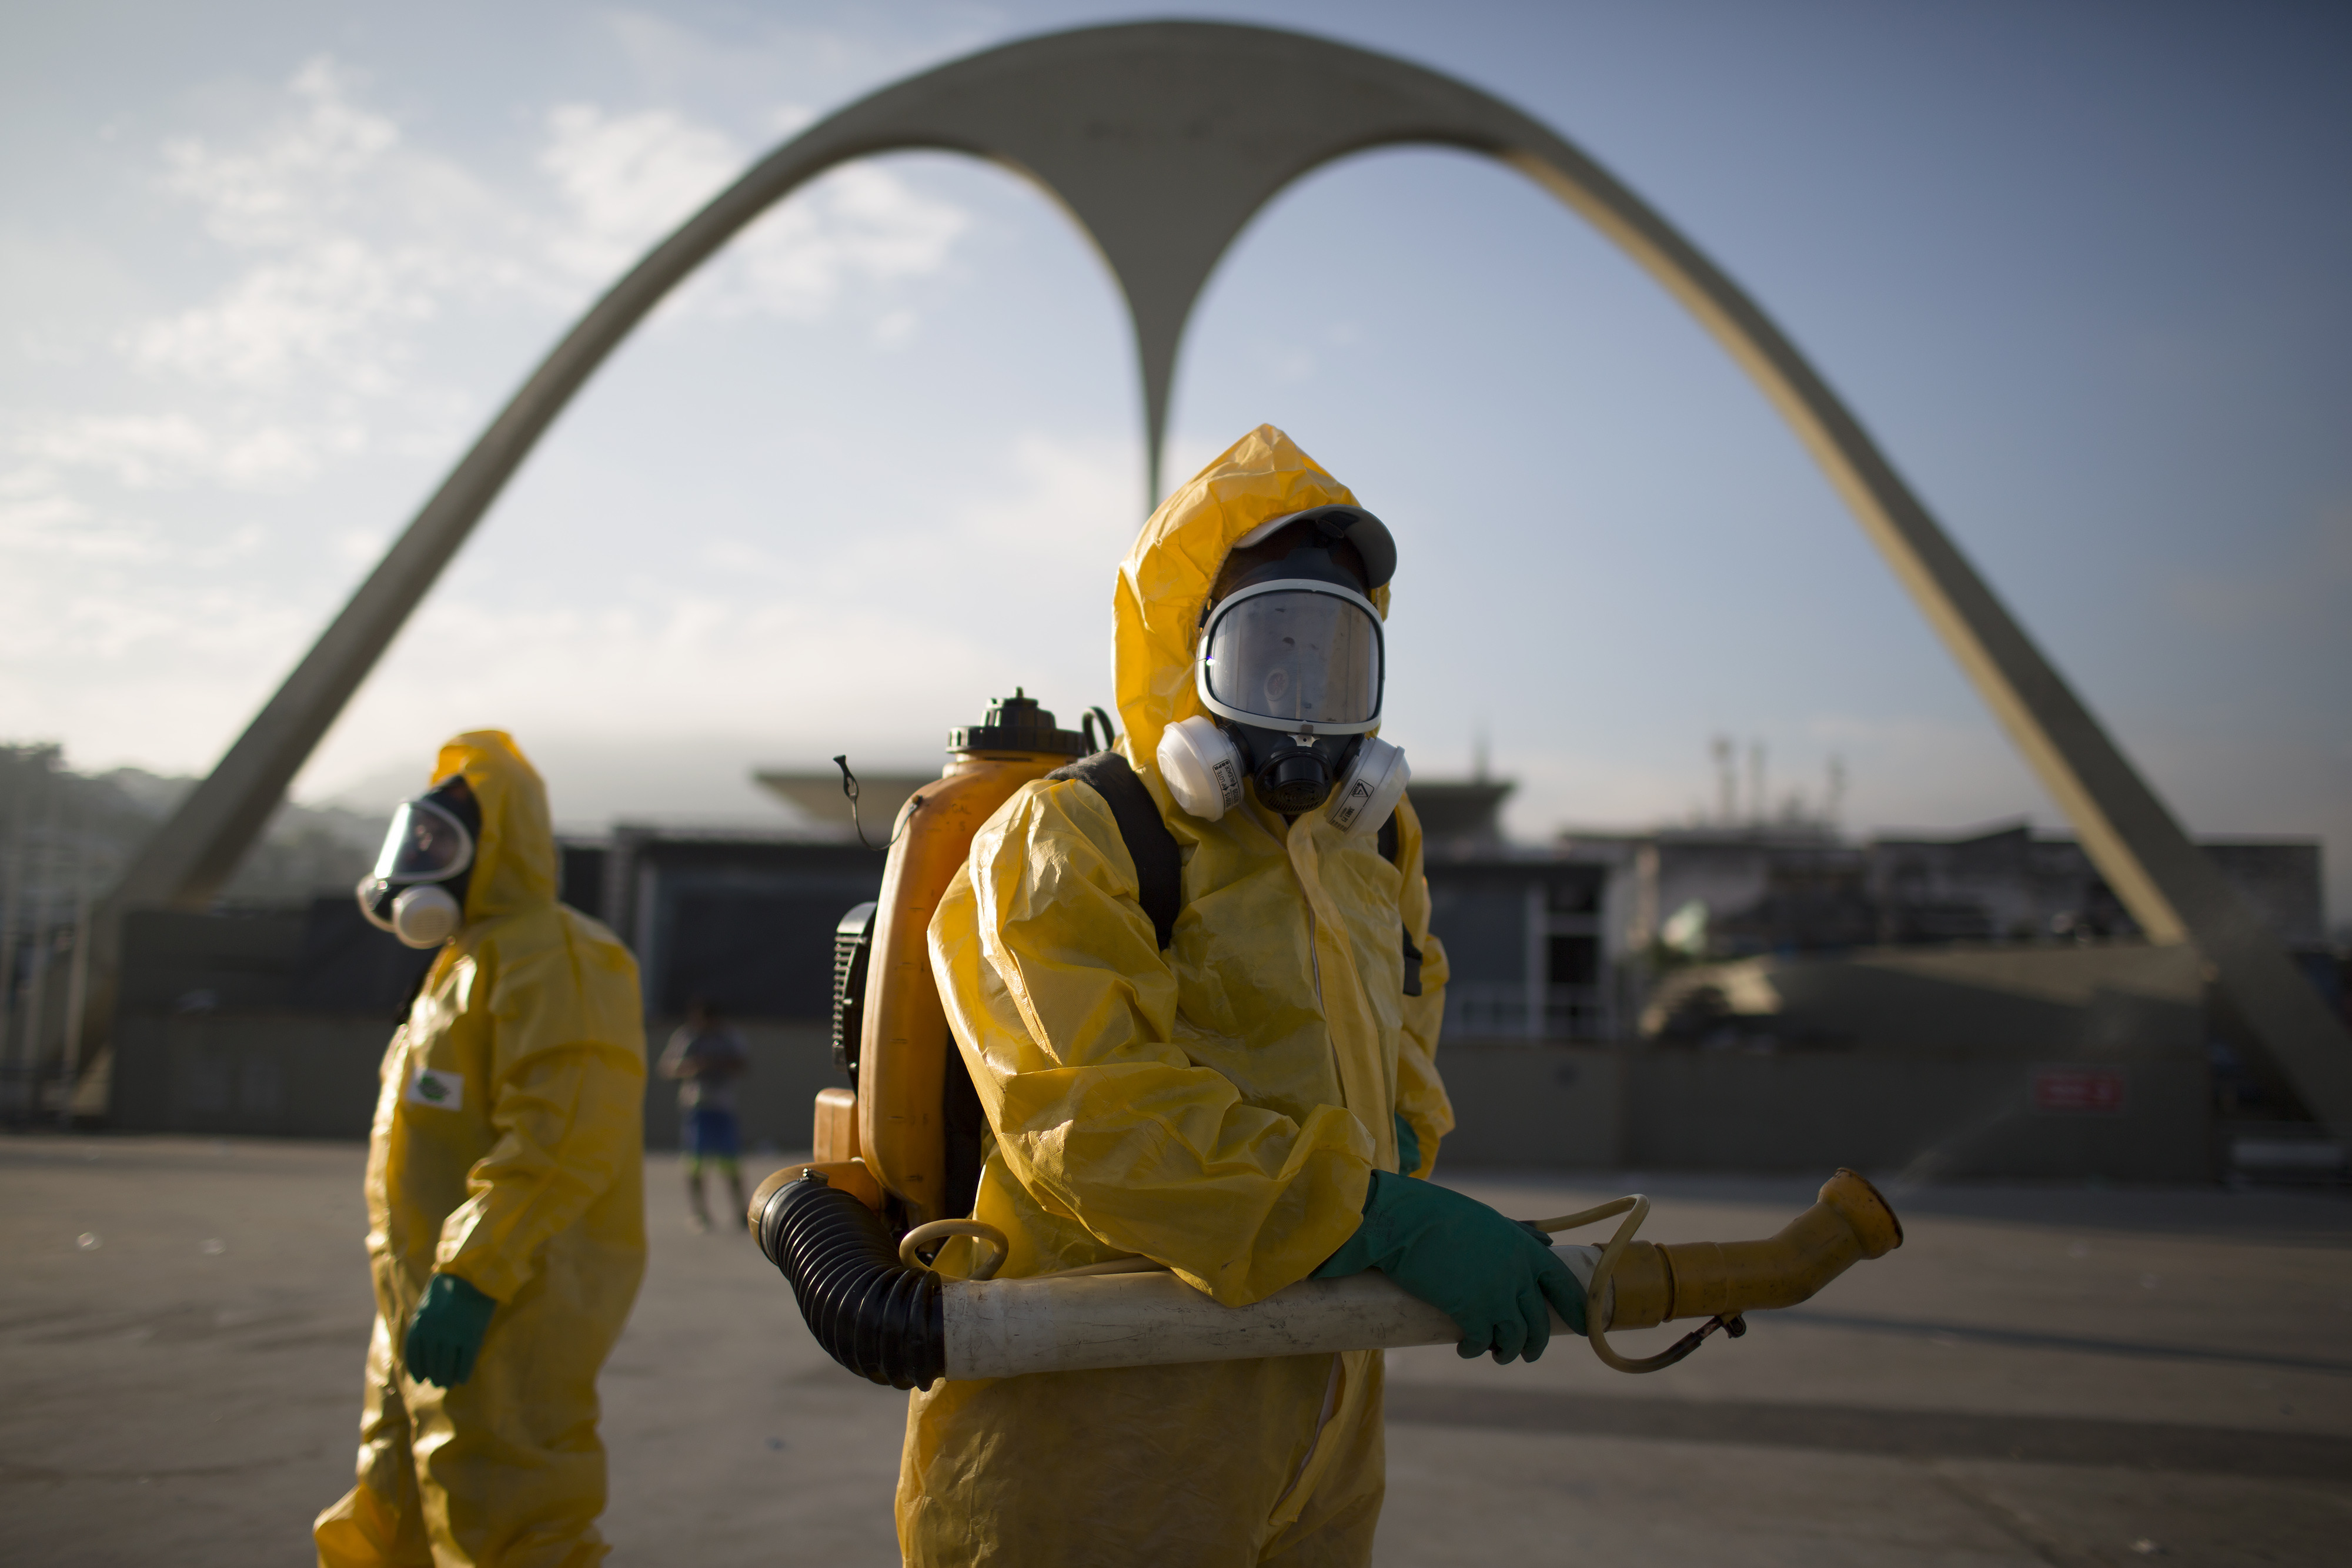 Olympics Zika - The World Health Organization stated that there was “no public health justification” to postpone the 2016 Rio Olympics due to the Zika virus. Is the fear of Zika at the games overblown?